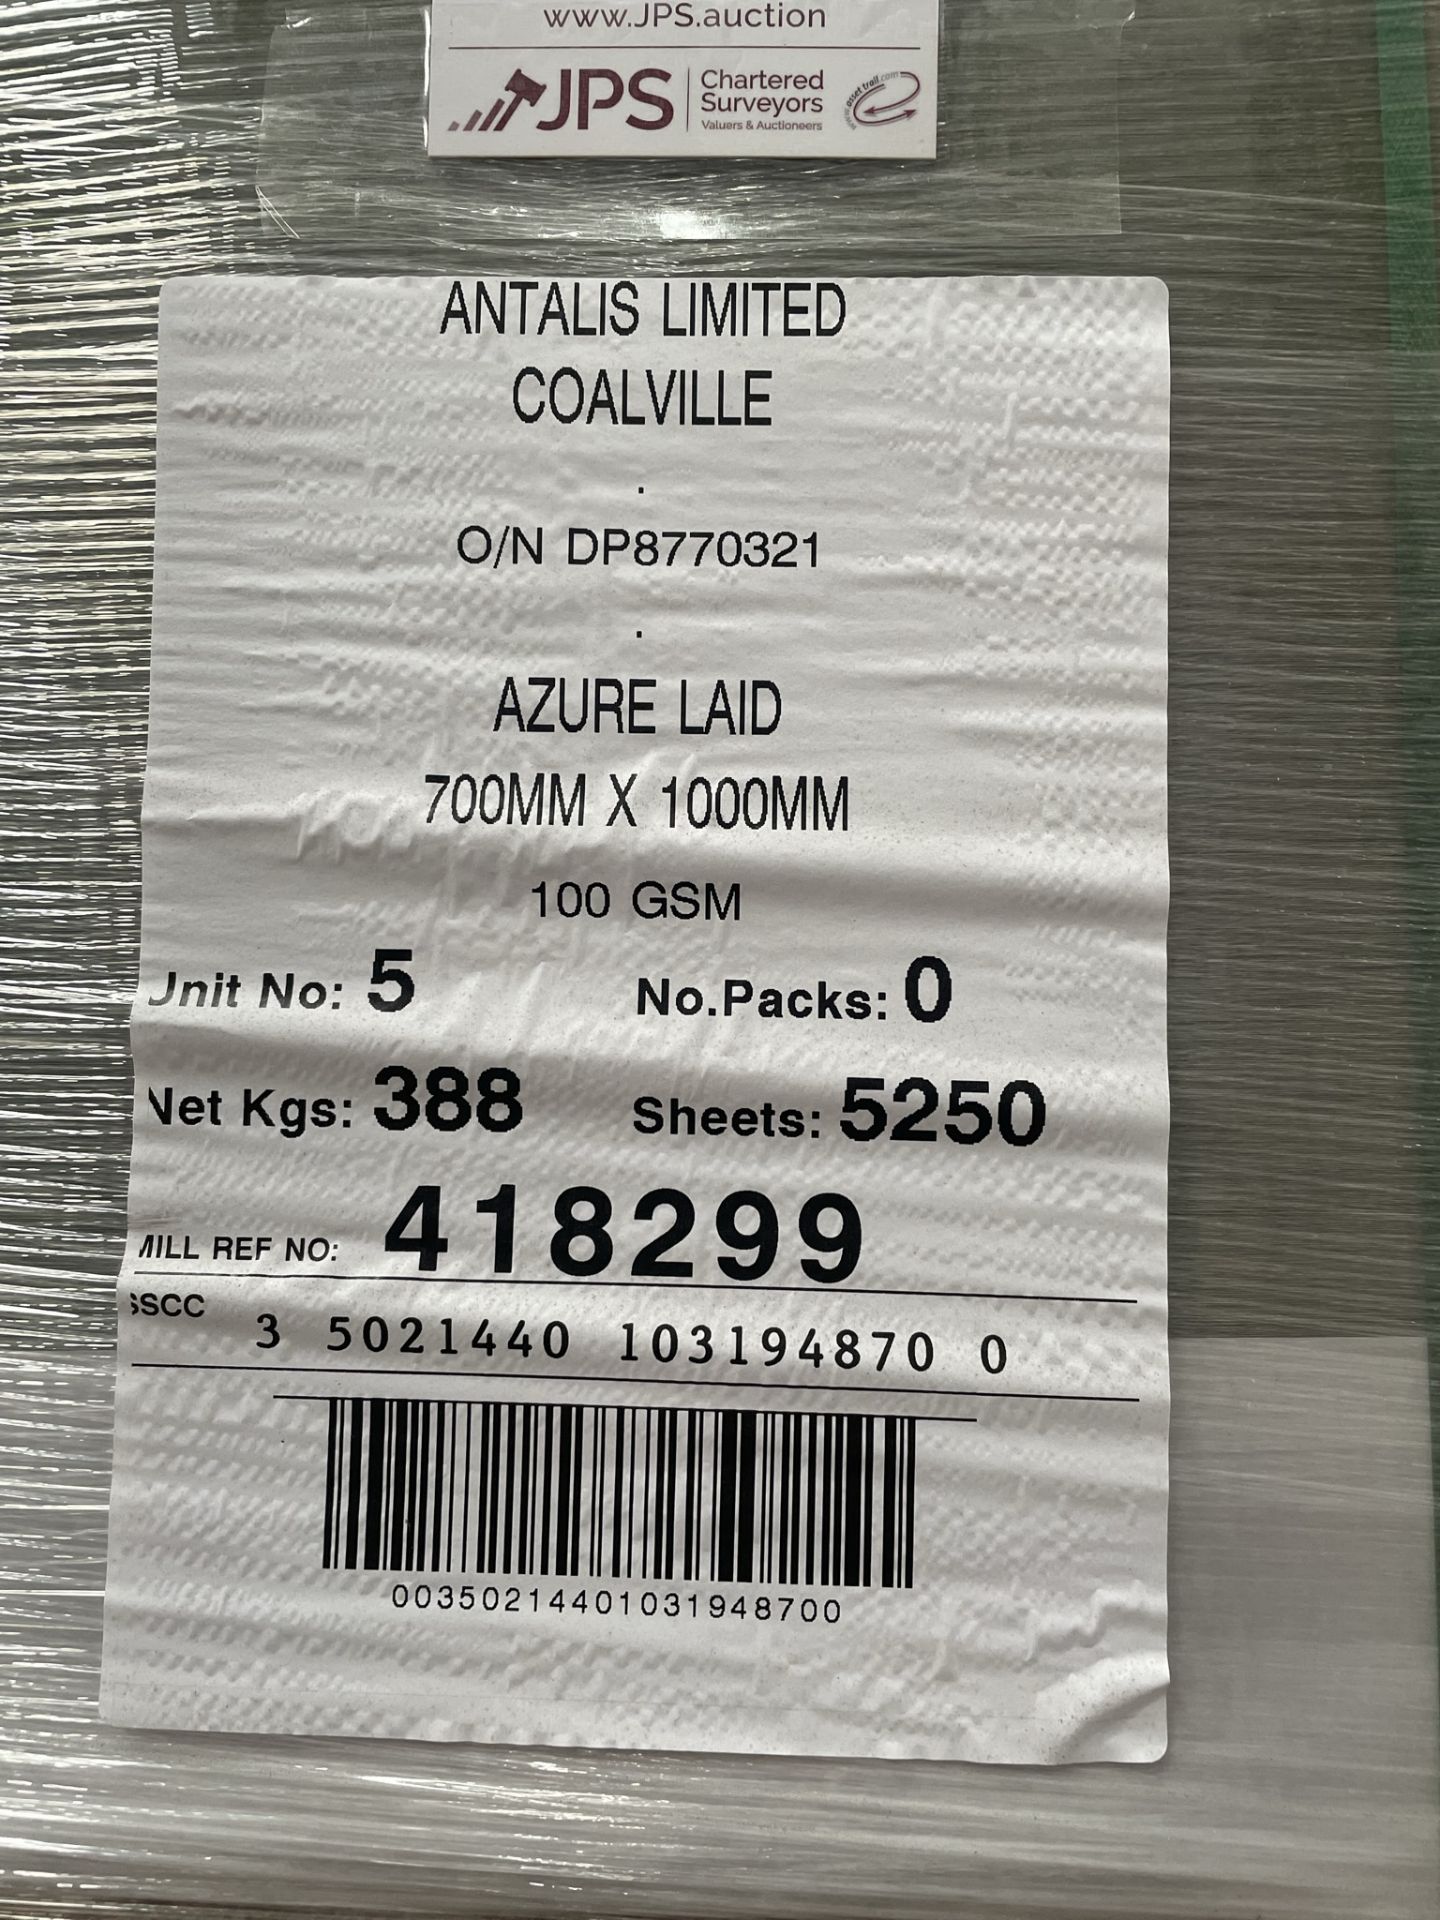 4 x Pallets of Azure Laid 100GSM Paper | 70 x 100cm | Approx 18,550 Sheets in Total - Image 2 of 2